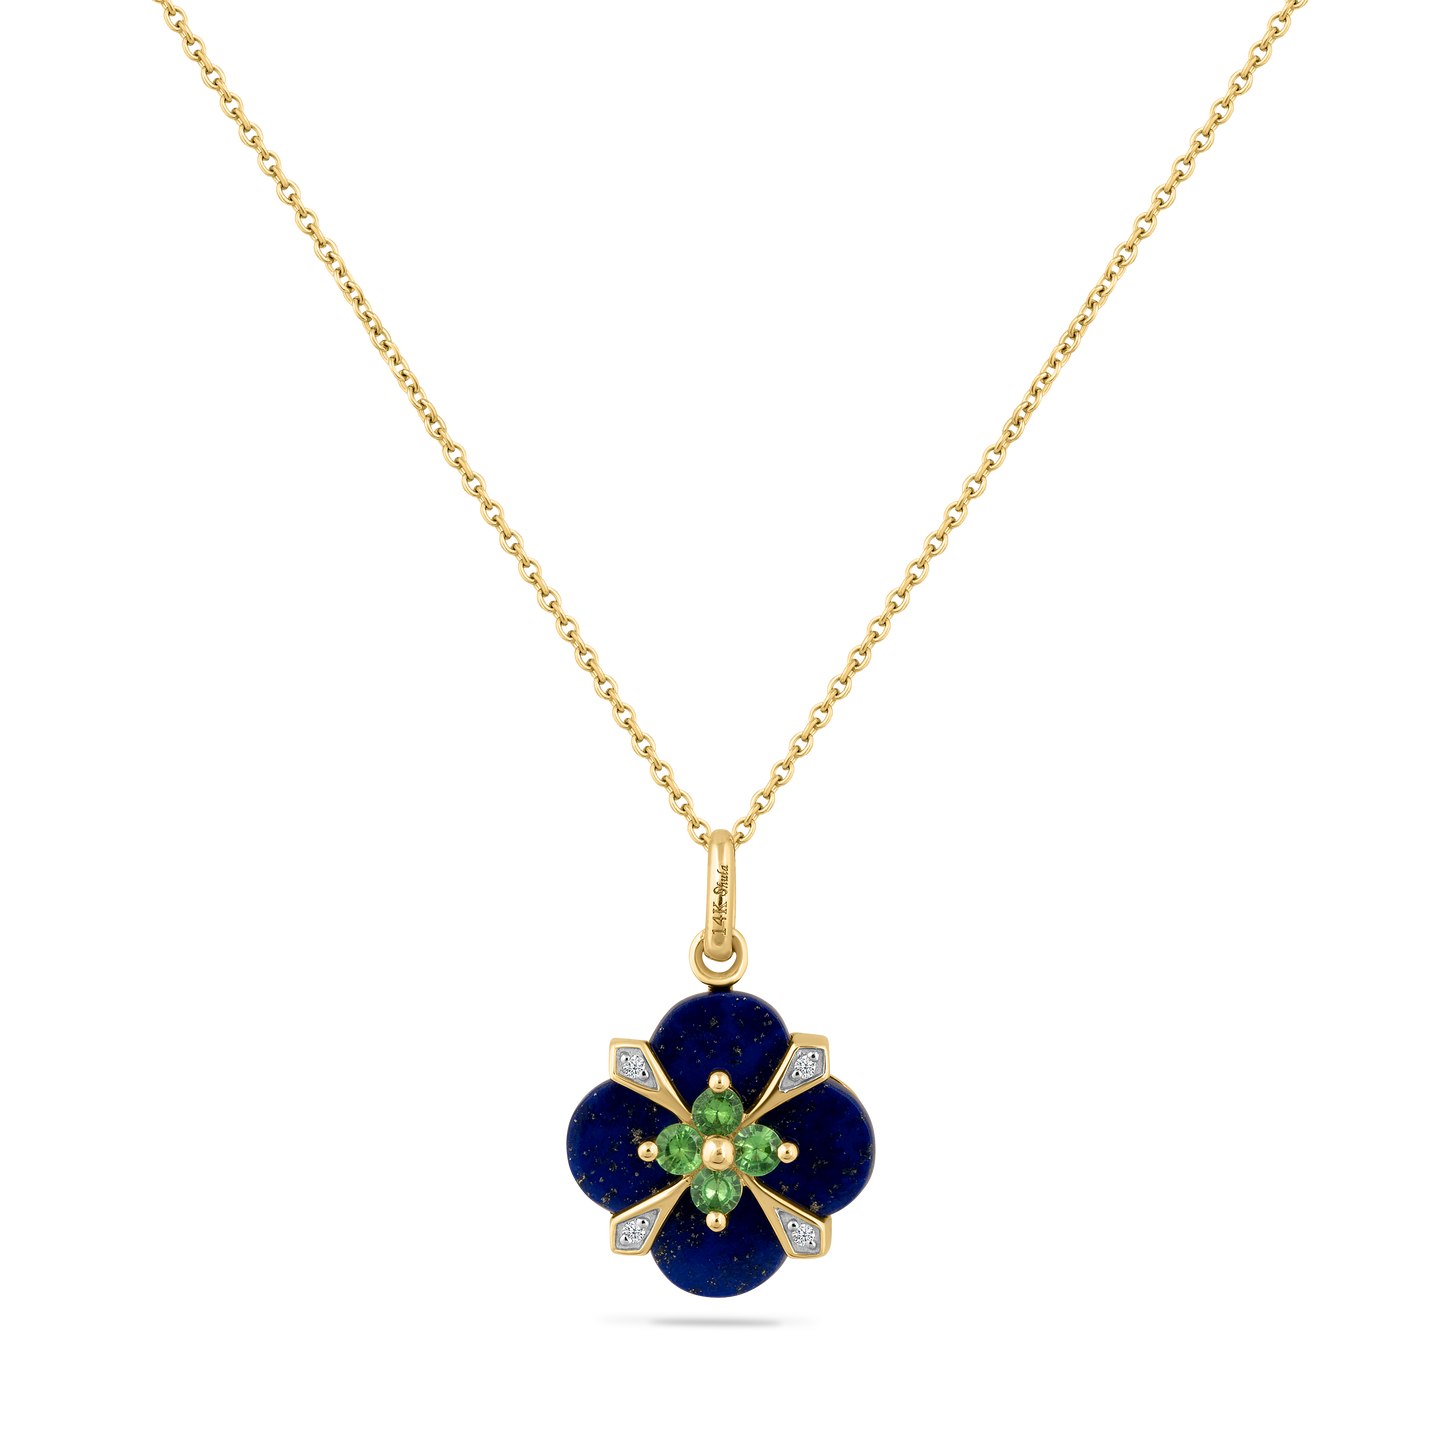 14K LAPIS PENDANT WITH 4 DIAMONDS 0.0165CT AND 4 TSAVORITES 0.18CT ON 18 INCHES CABLE CHAIN